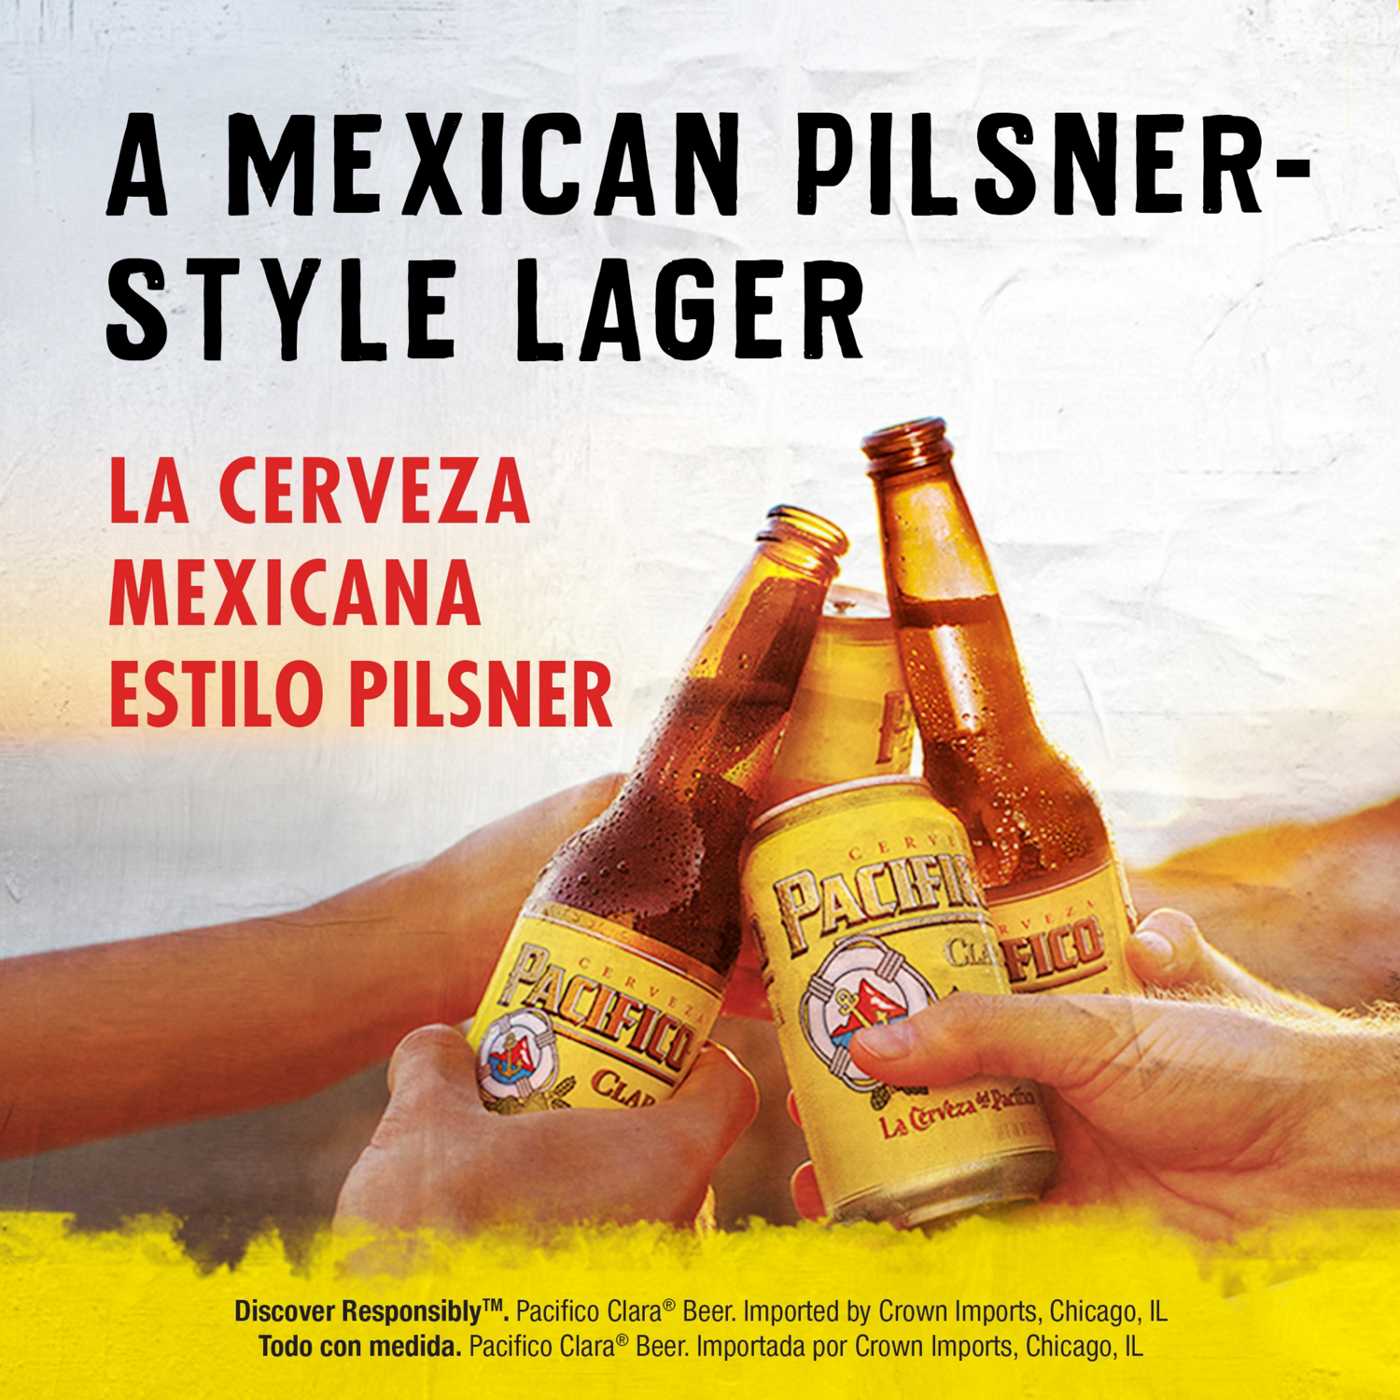 Pacifico Clara Mexican Lager Import Beer 12 oz Bottles, 6 pk; image 6 of 10